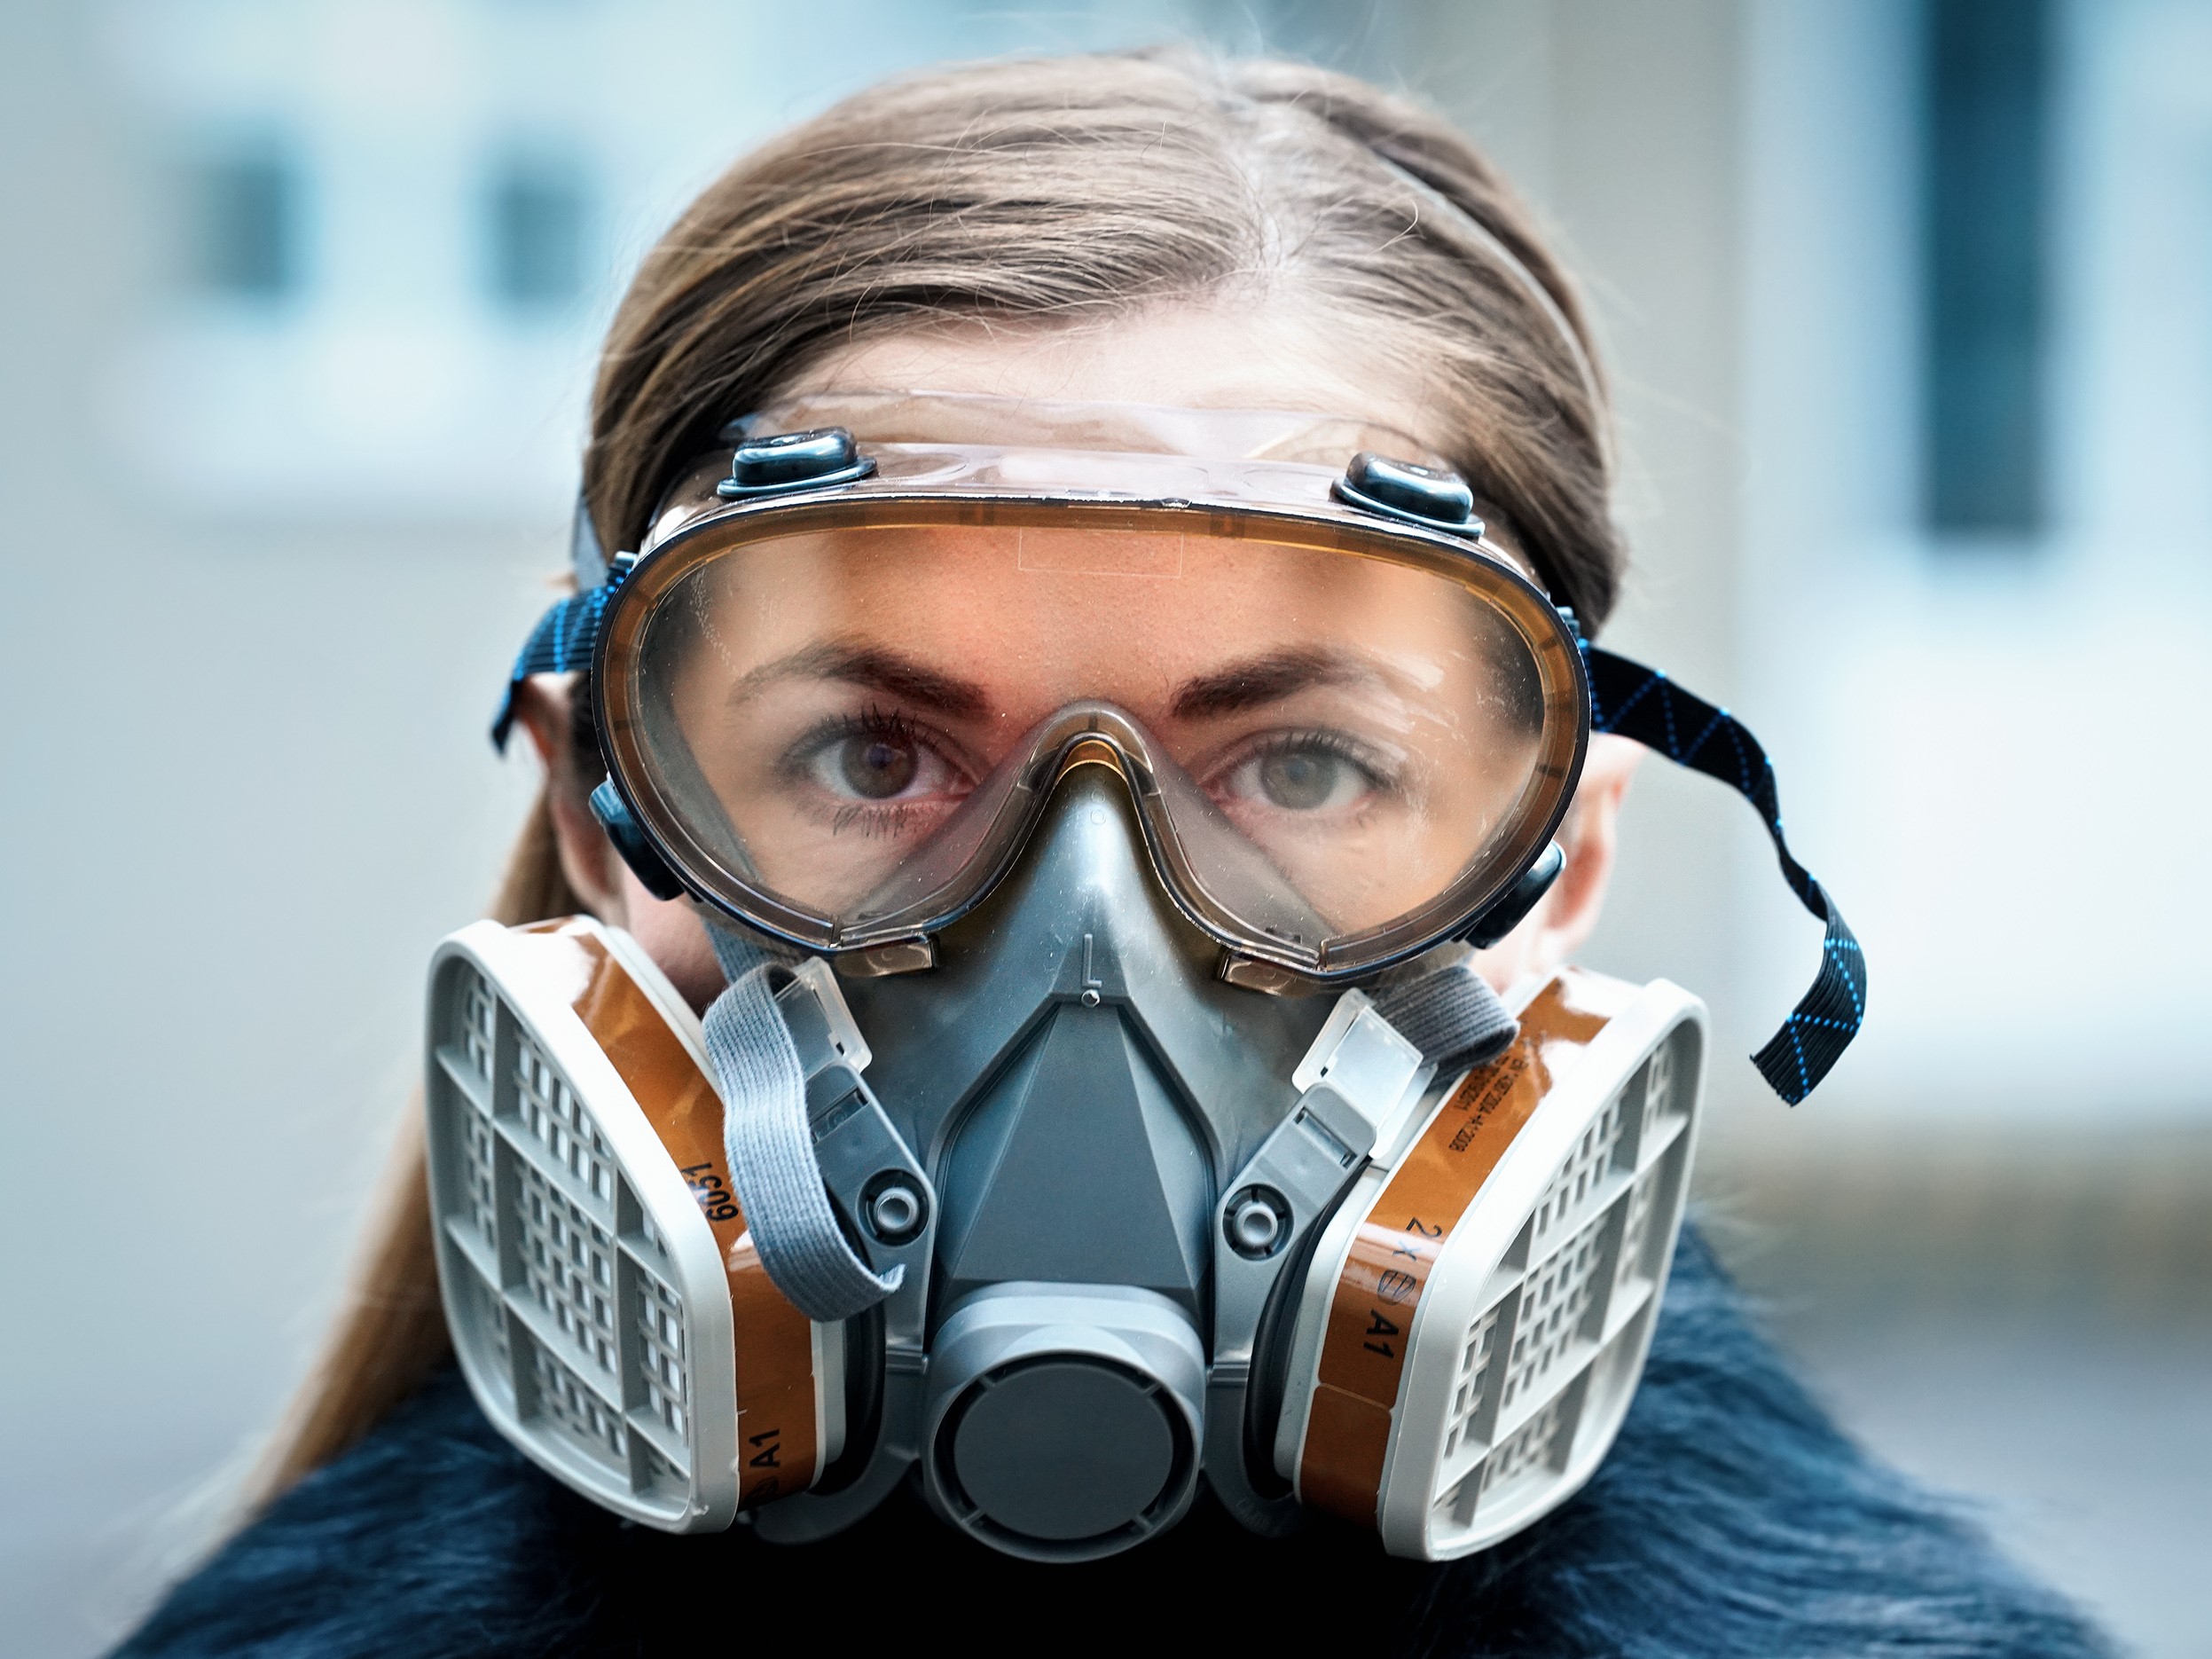 Breathing Protection Equipment For Different Workplaces